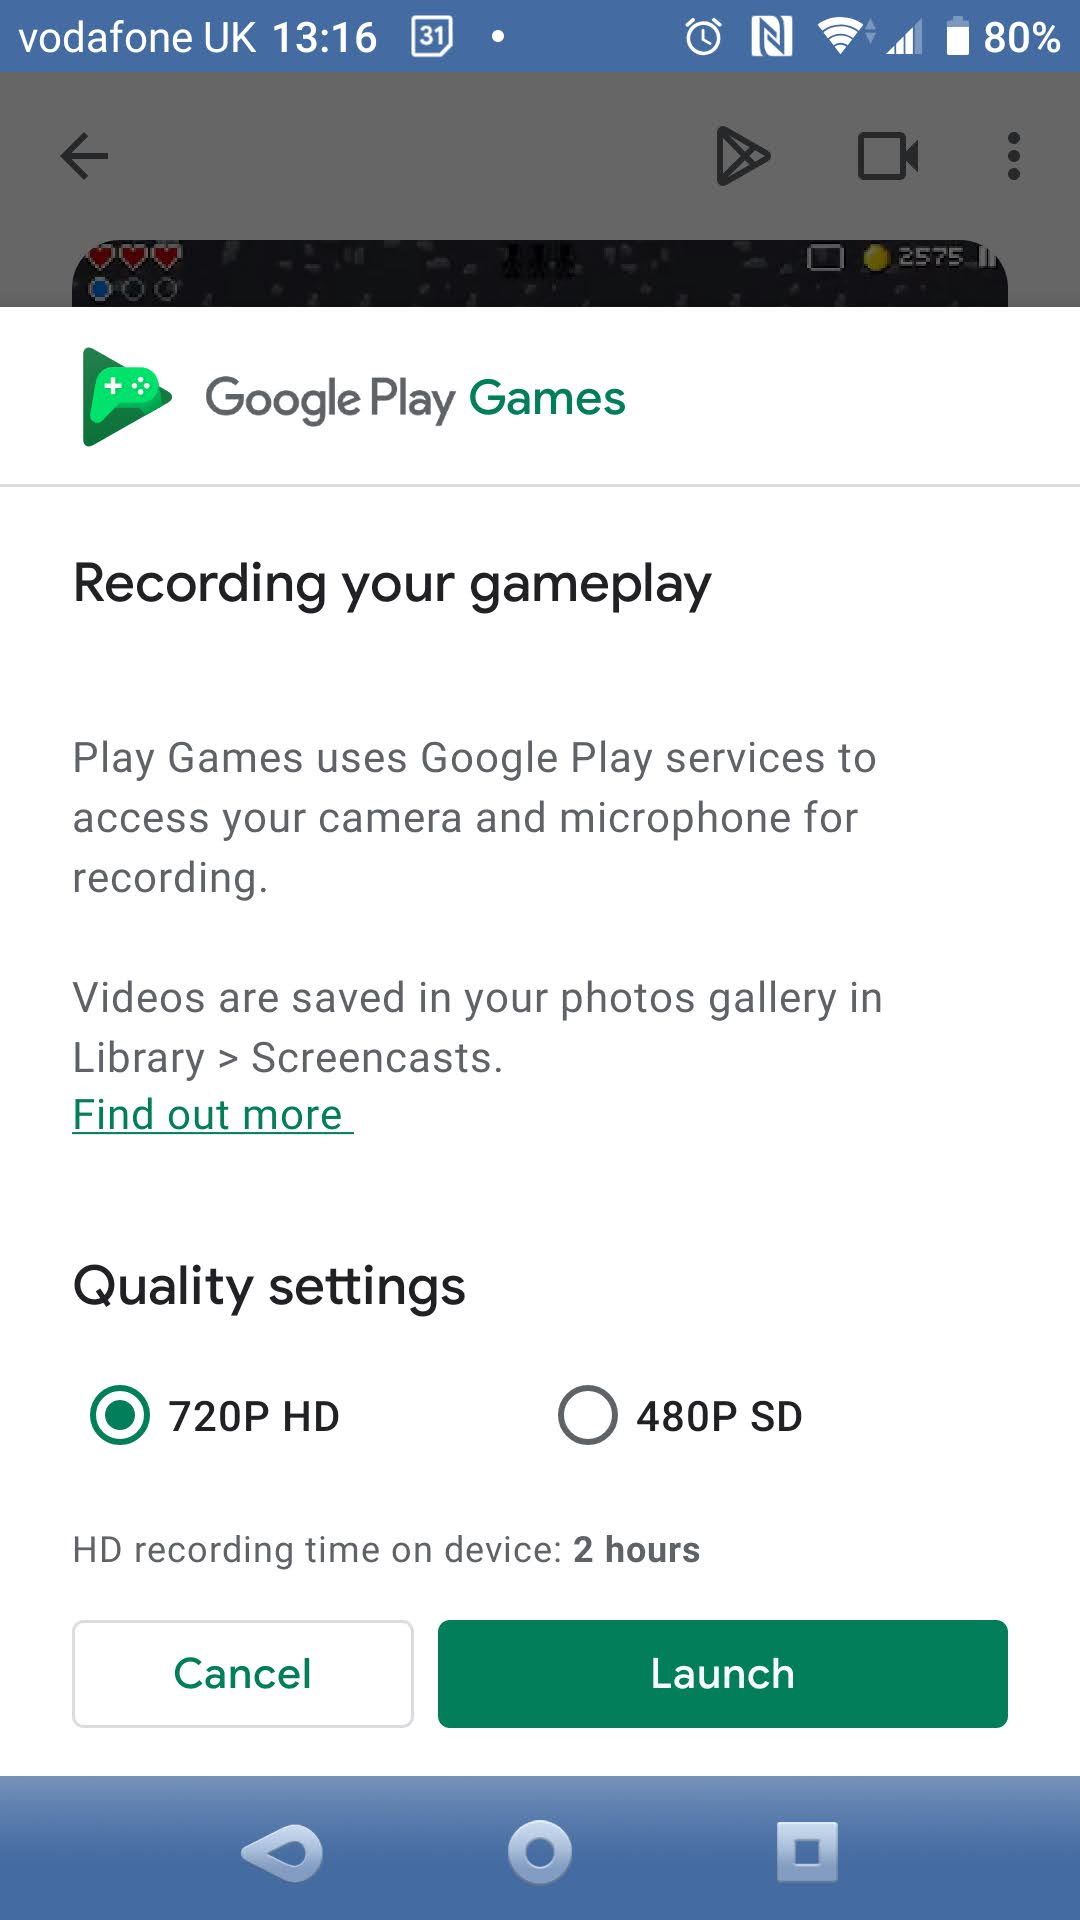 Choose the video quality settings